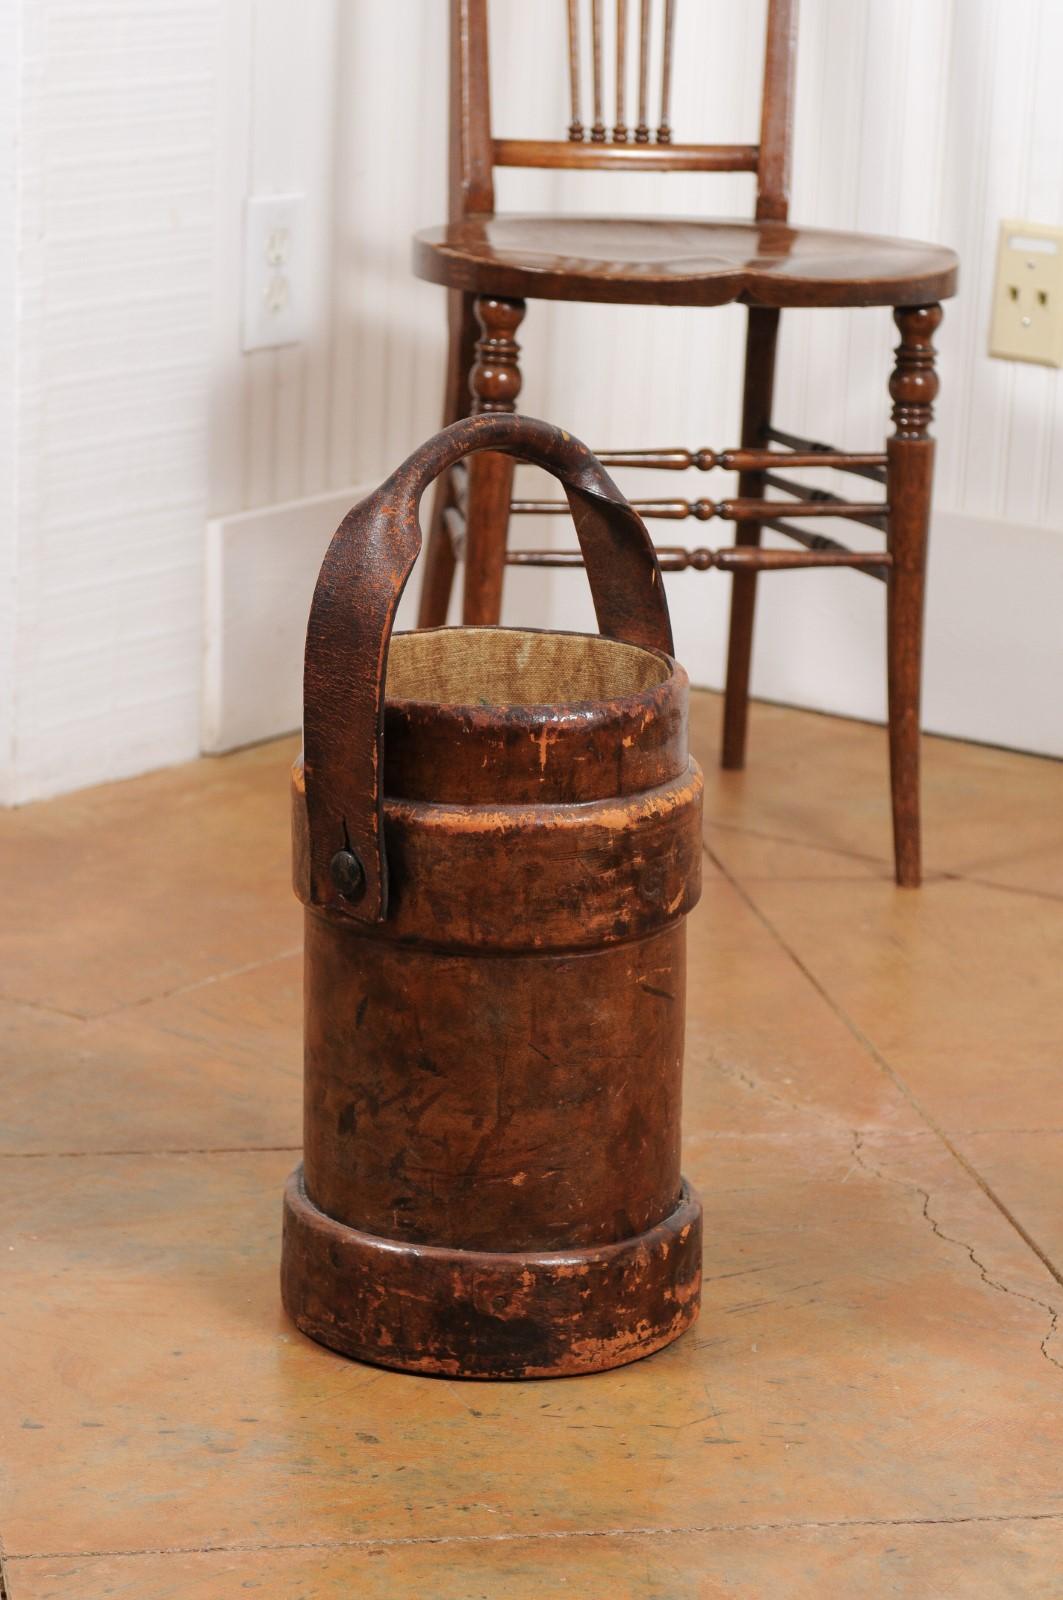 20th Century British Royal Navy Leather Cordite Bucket with BH & G Ltd Stamp on the Underside